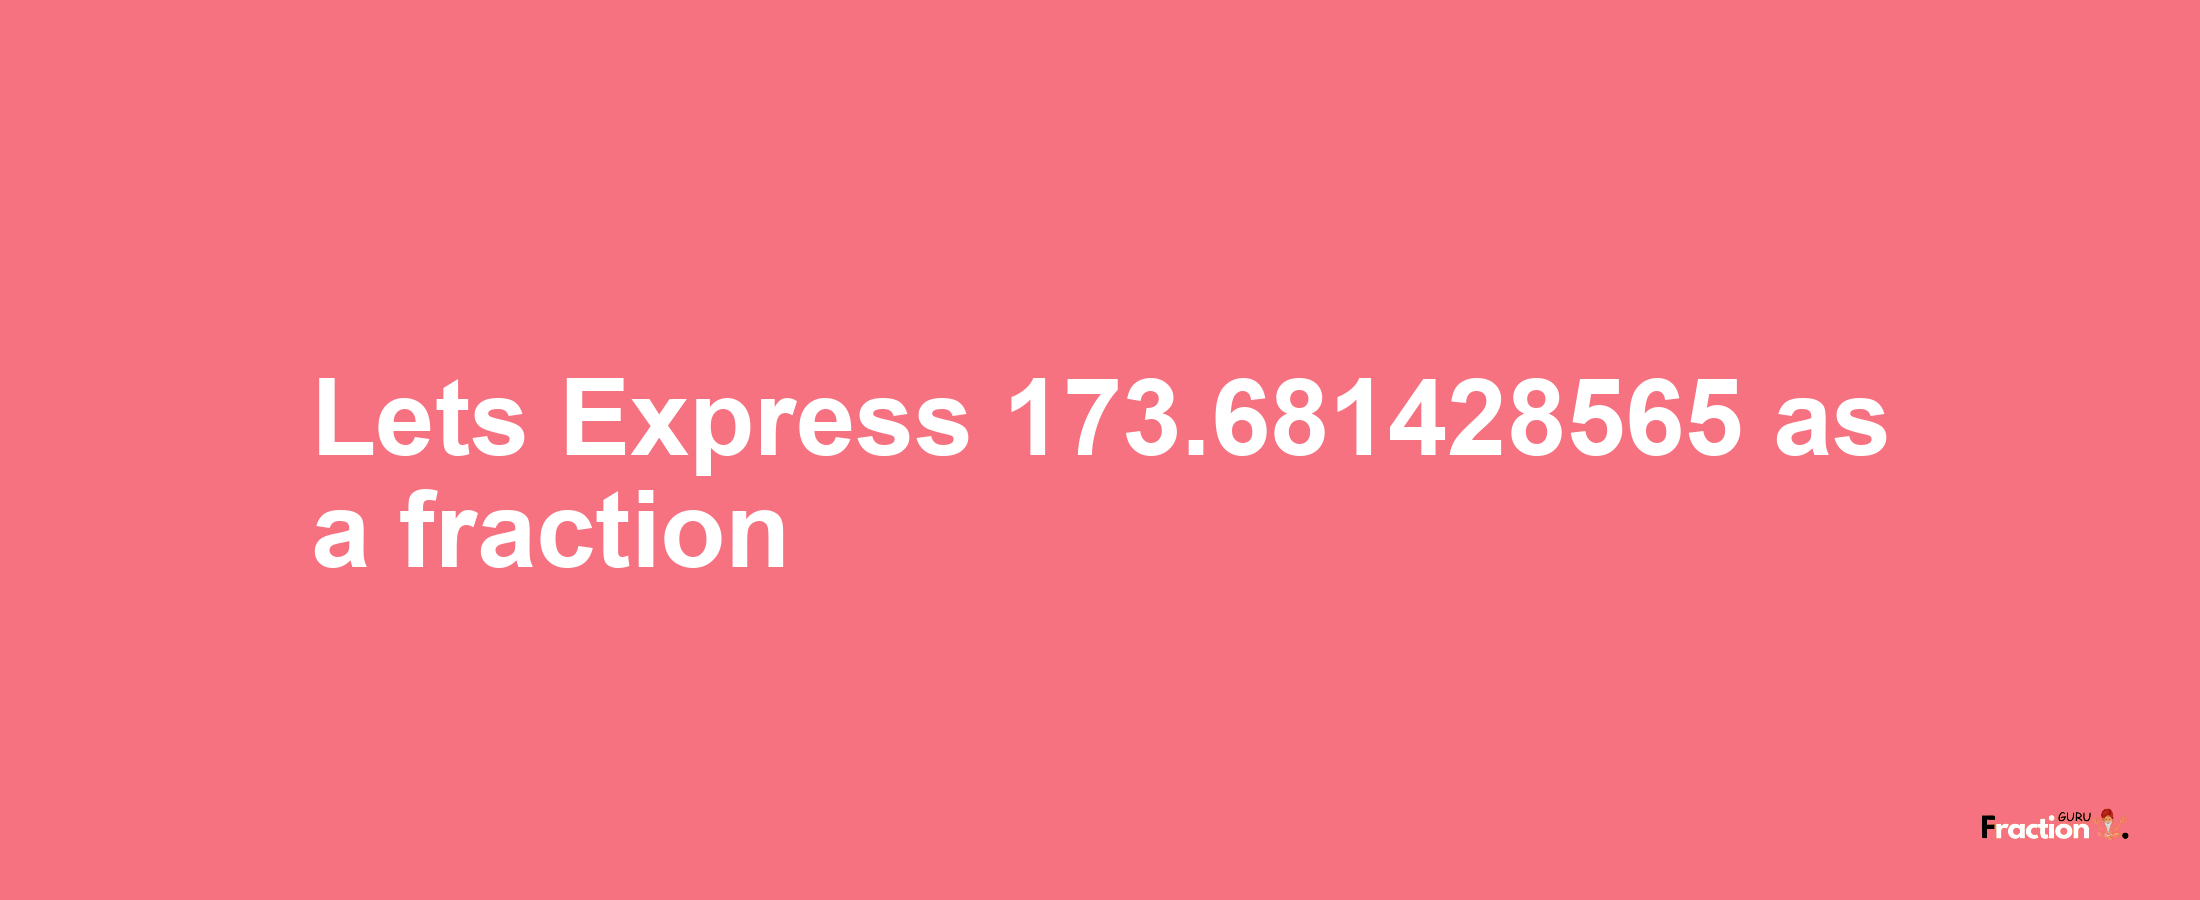 Lets Express 173.681428565 as afraction